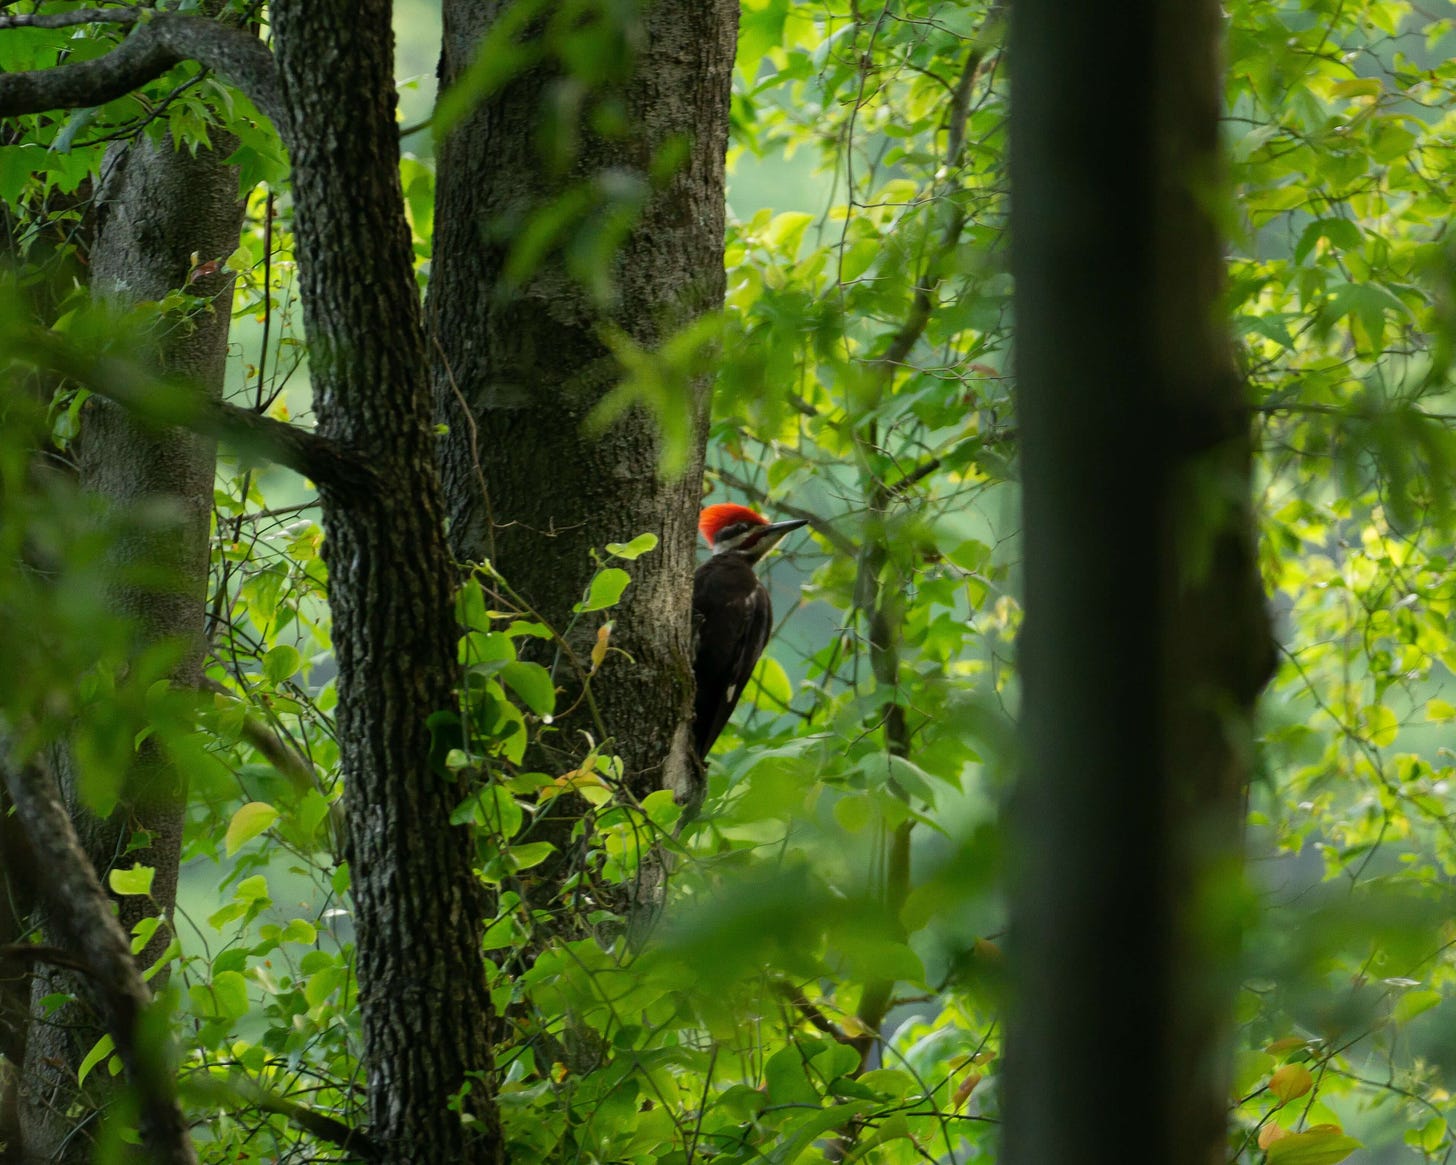 A male pileated woodpecker perches on the side of a tree in thick foliage, backlit by sunshine that makes his red head-crest glow brightly in the dim scene.